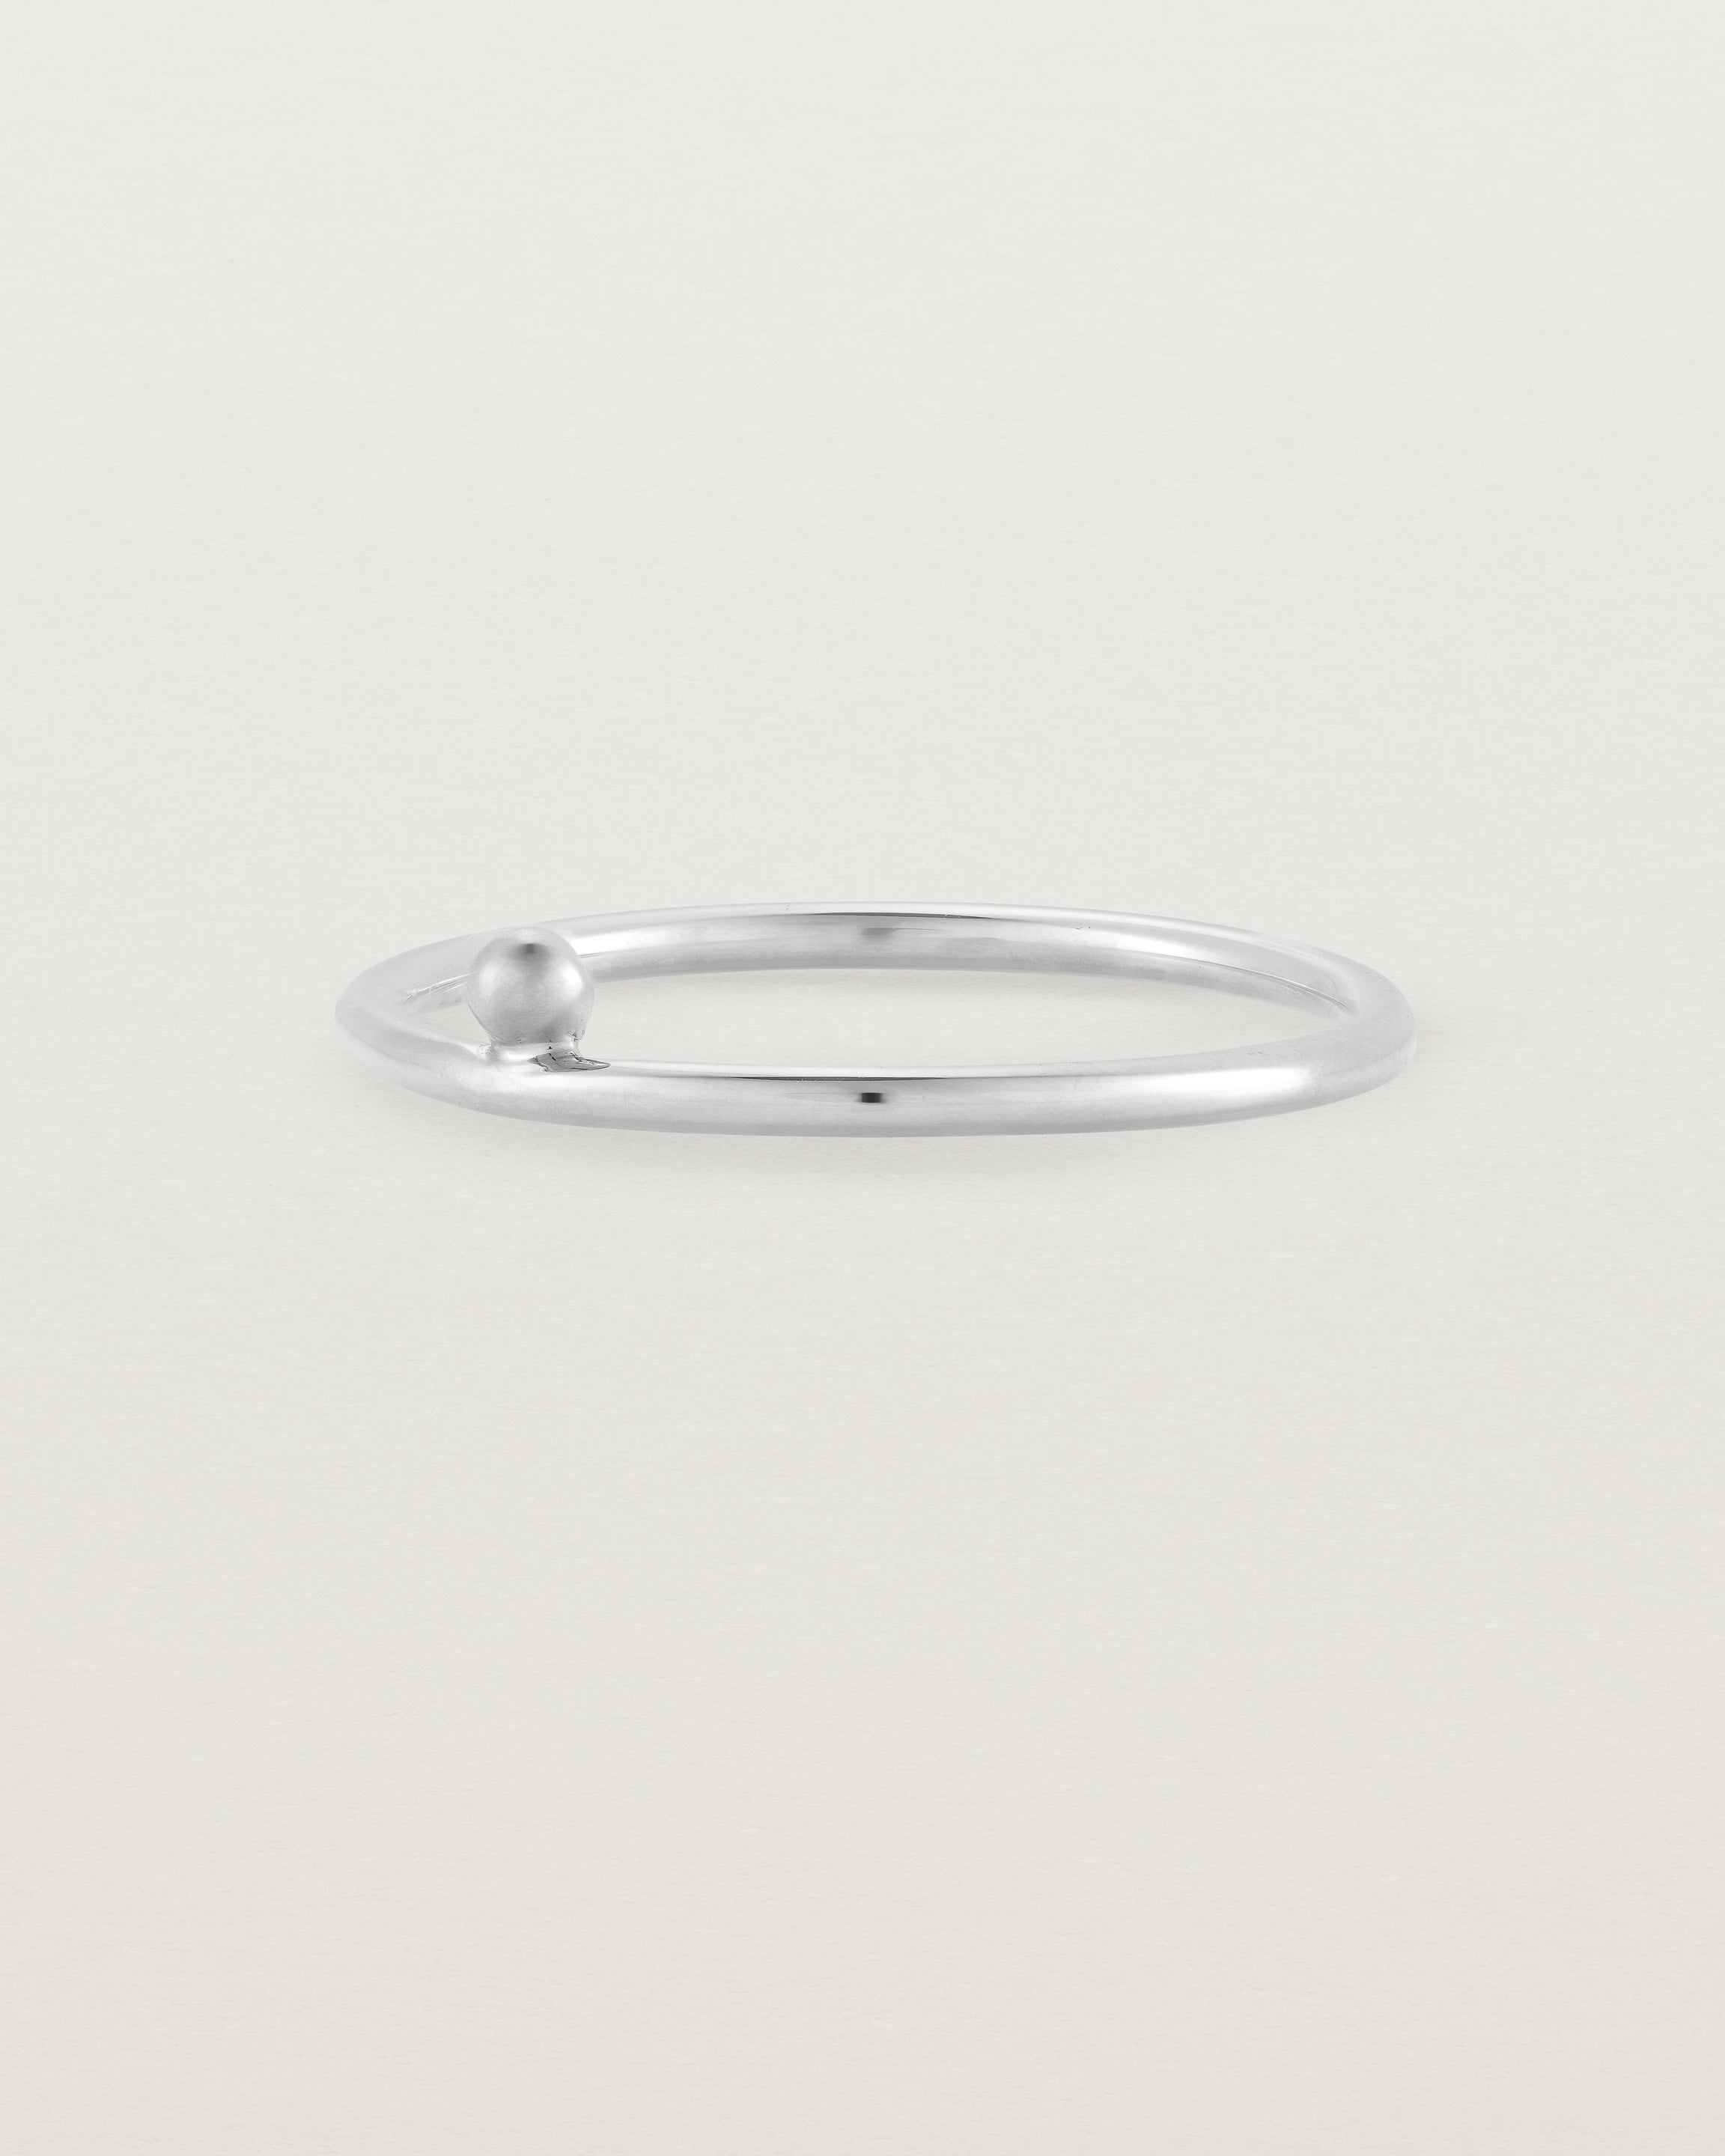 Silver fine ring with a single dot detail